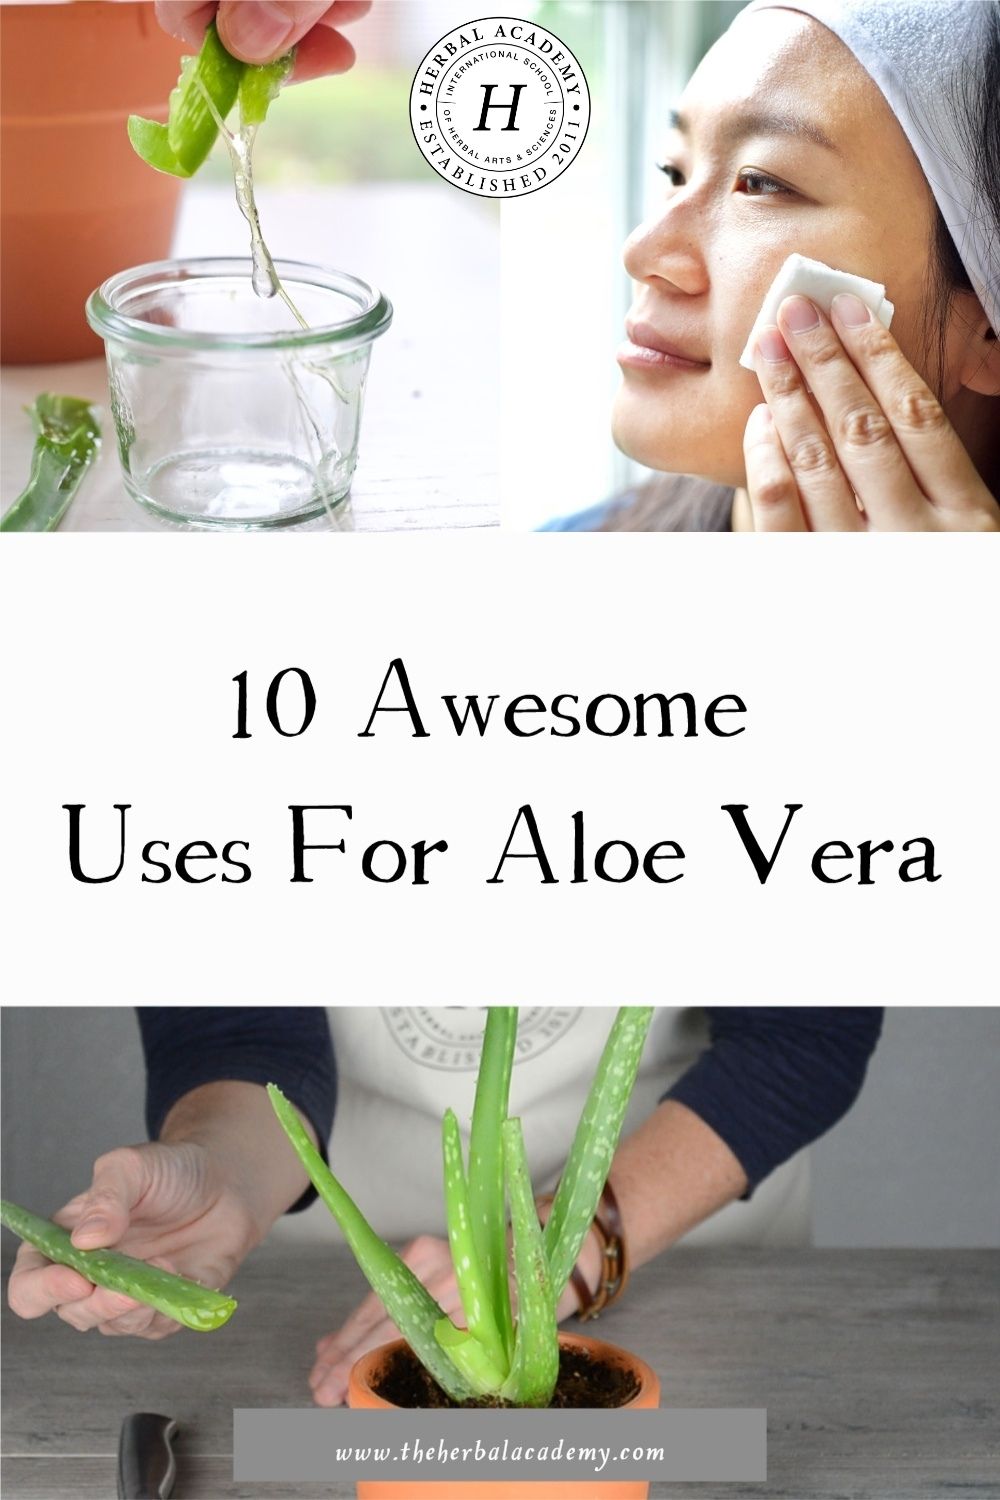 10 Awesome Uses For Aloe Vera | Herbal Academy | The aloe vera plant is a popular and widely used plant for herbal medicine. We have ten uses for aloe vera that you will want to try!